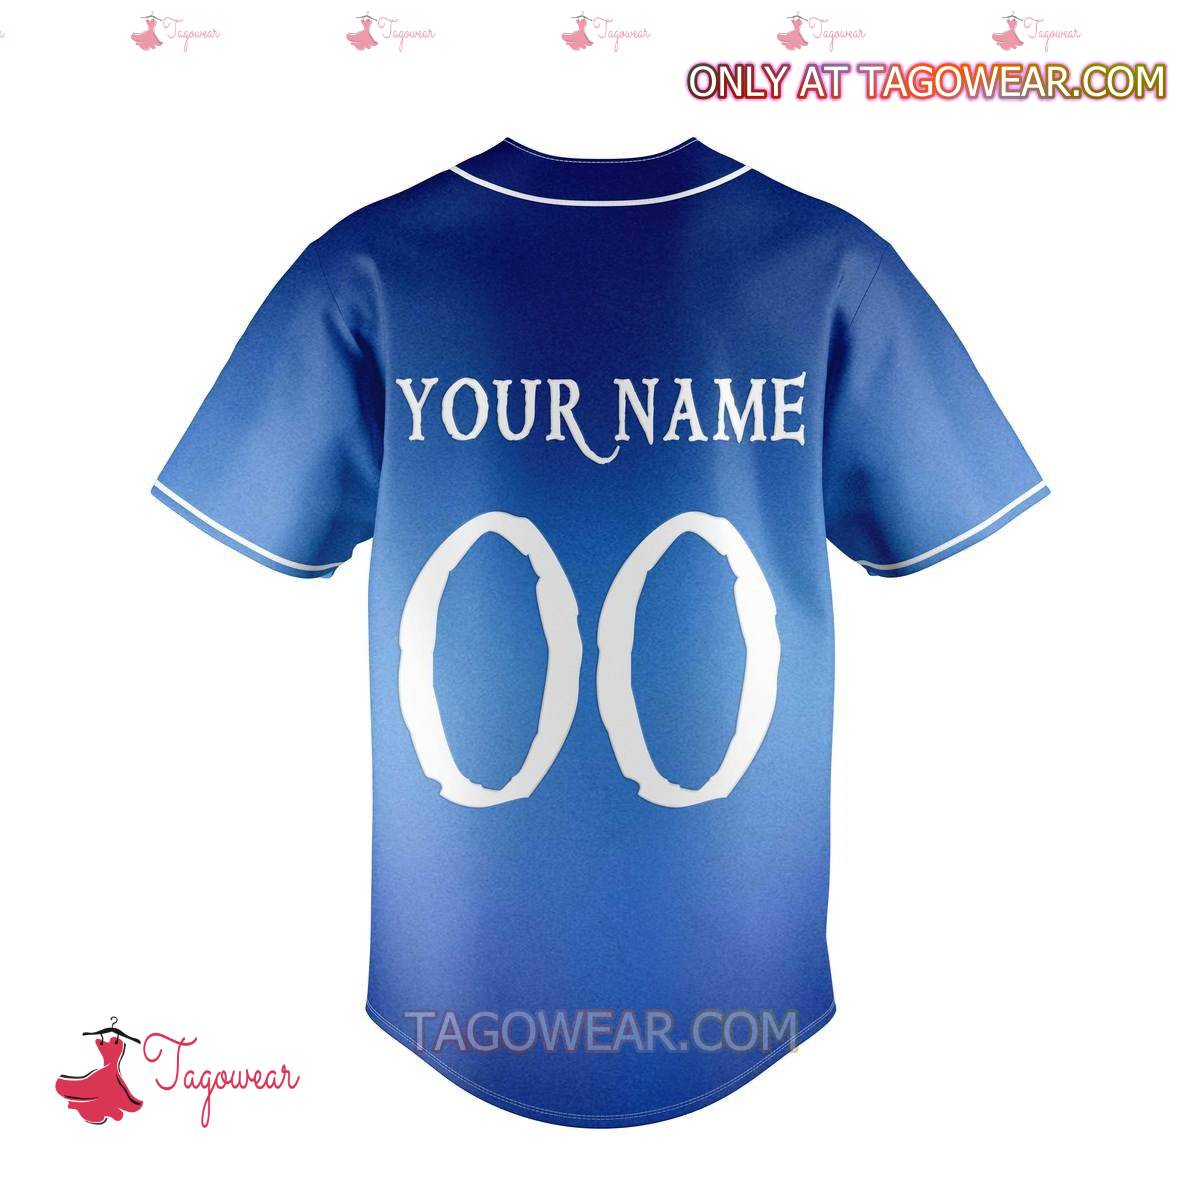 Camp Half Blood Cabin One Zeus Personalized Baseball Jersey b